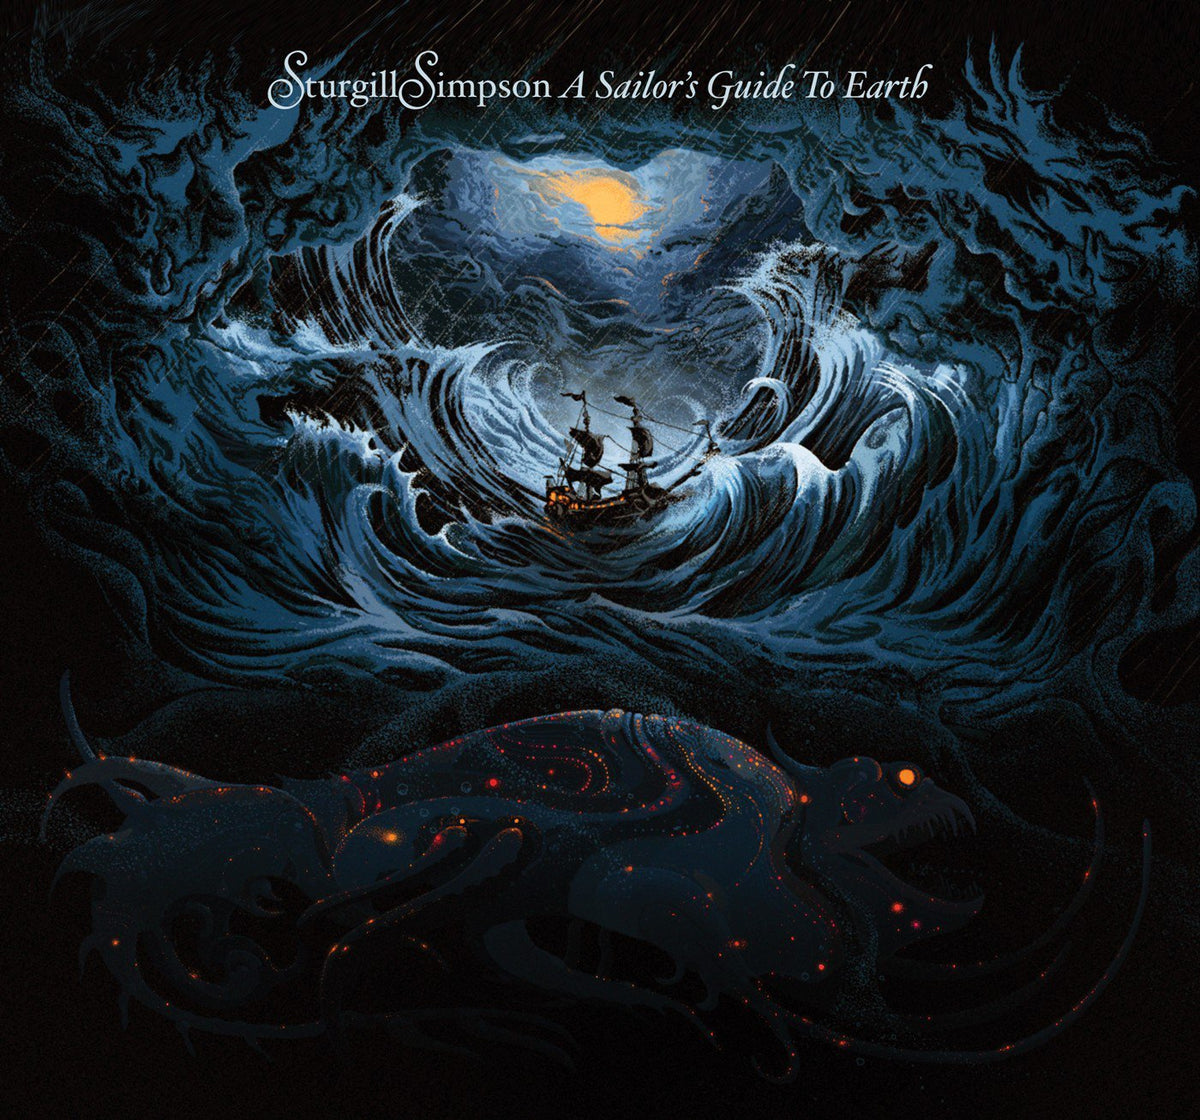 Album of the Week: Sturgill Simpson A Sailor’s Guide to Earth